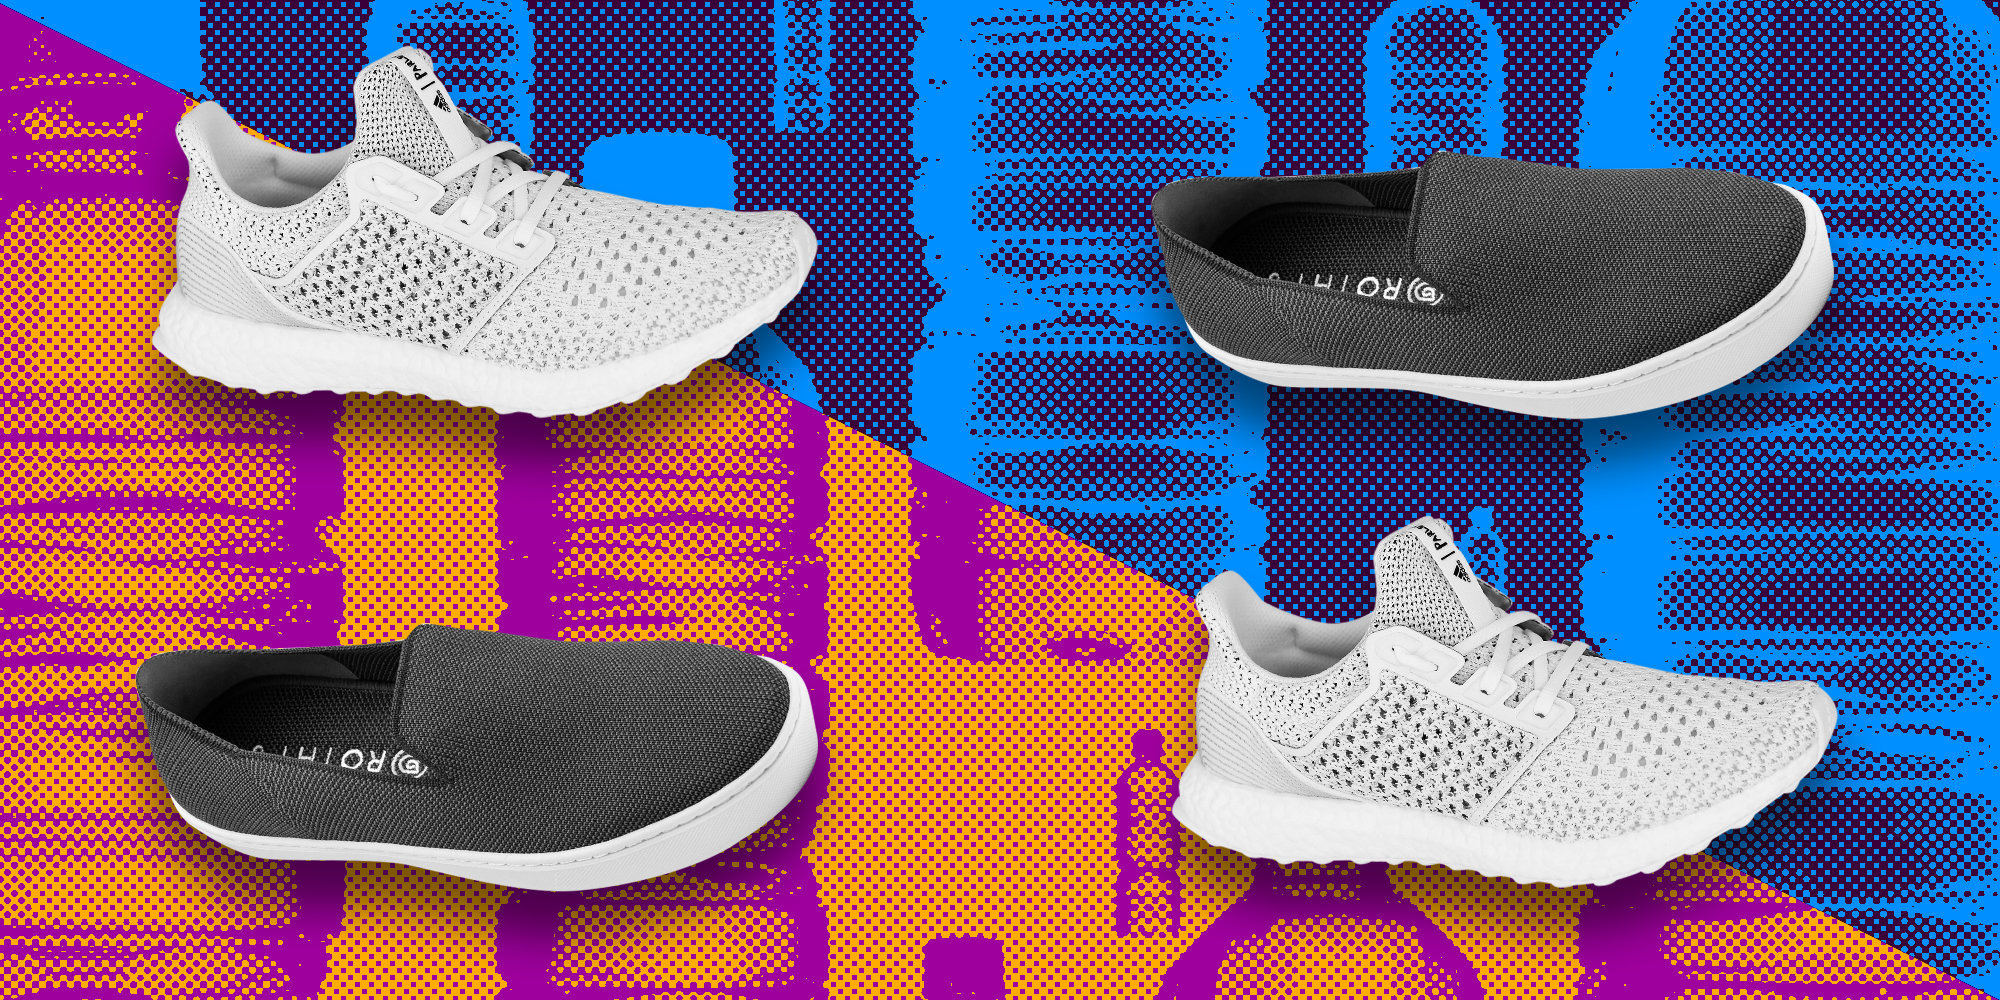 Can Sneakers Made From Recycled Plastic 